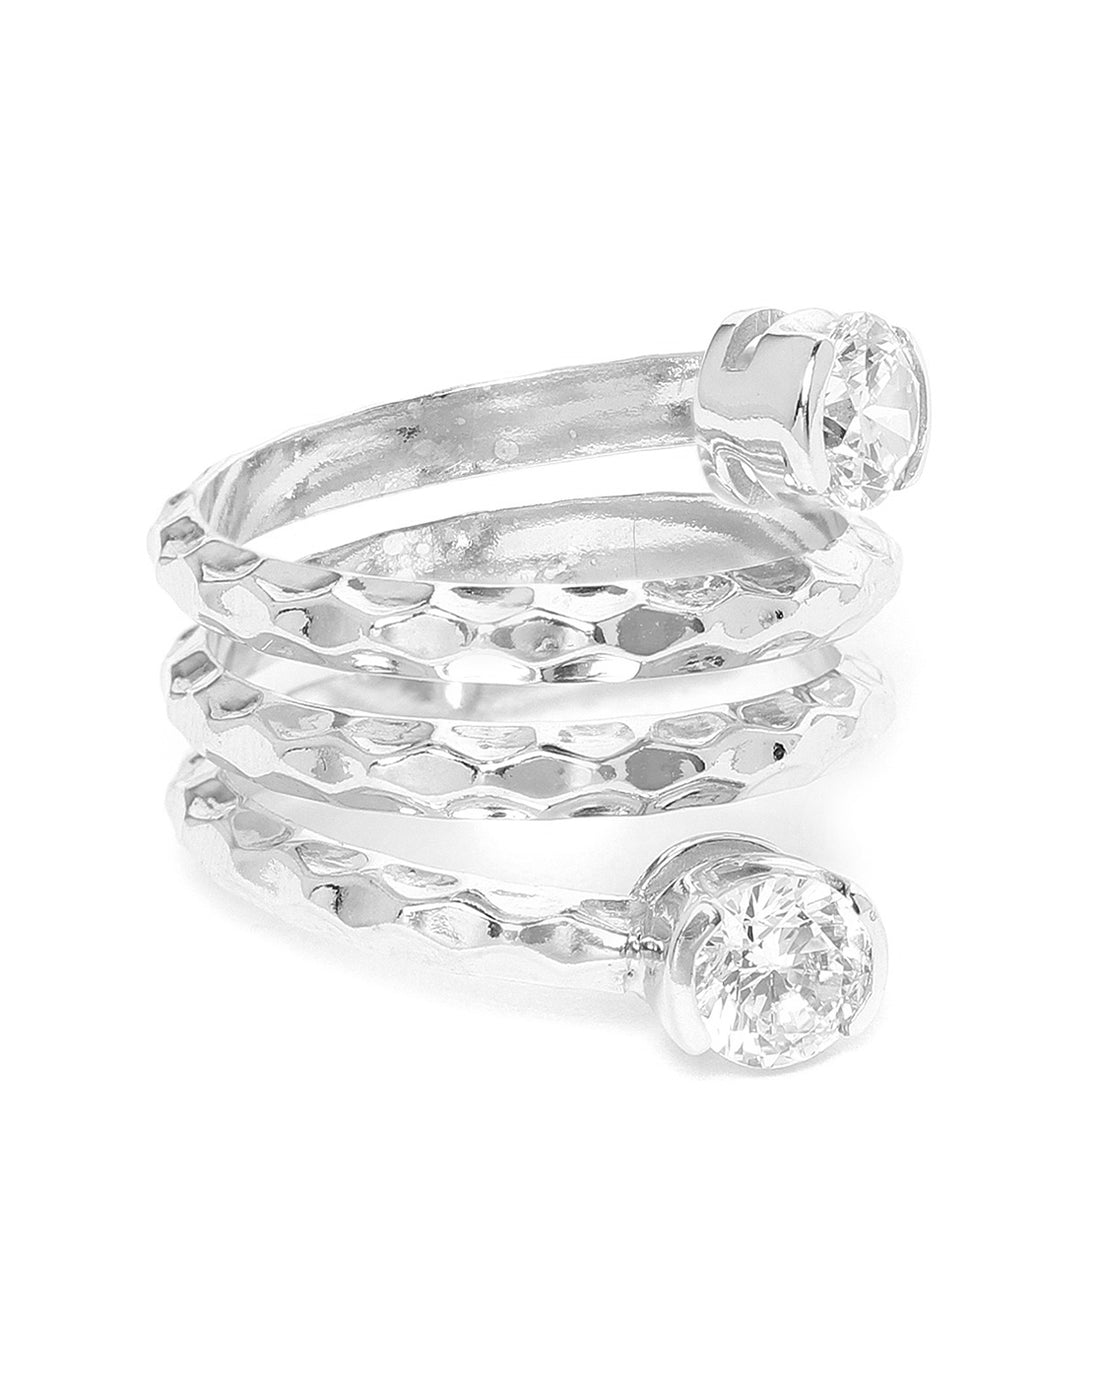 Carlton London Rhodium Plated Silver Toned Cz Stone Studded Adjustable Contemporary Finger Ring For Women